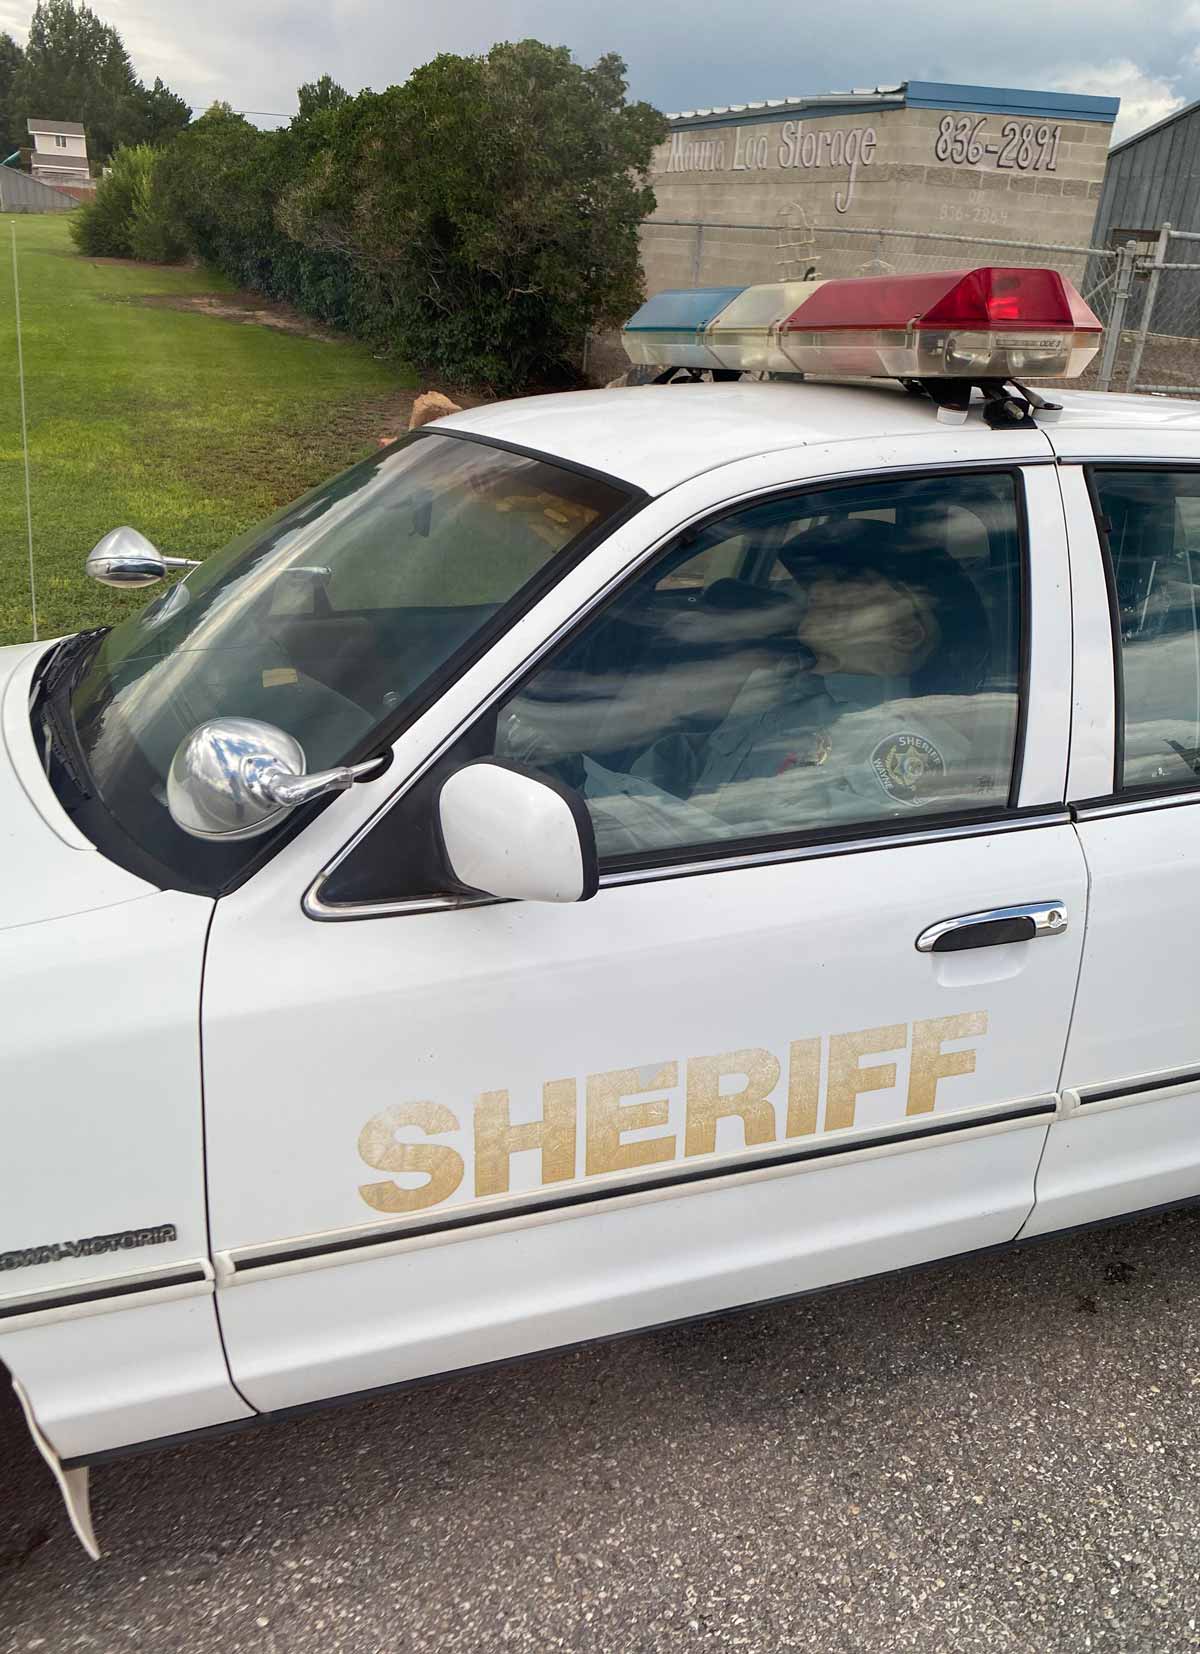 Small town of Loa, Utah uses a mannequin to patrol the highway. I’ve hit the brakes for this cop for years, until I realized he’s just a well placed decoy